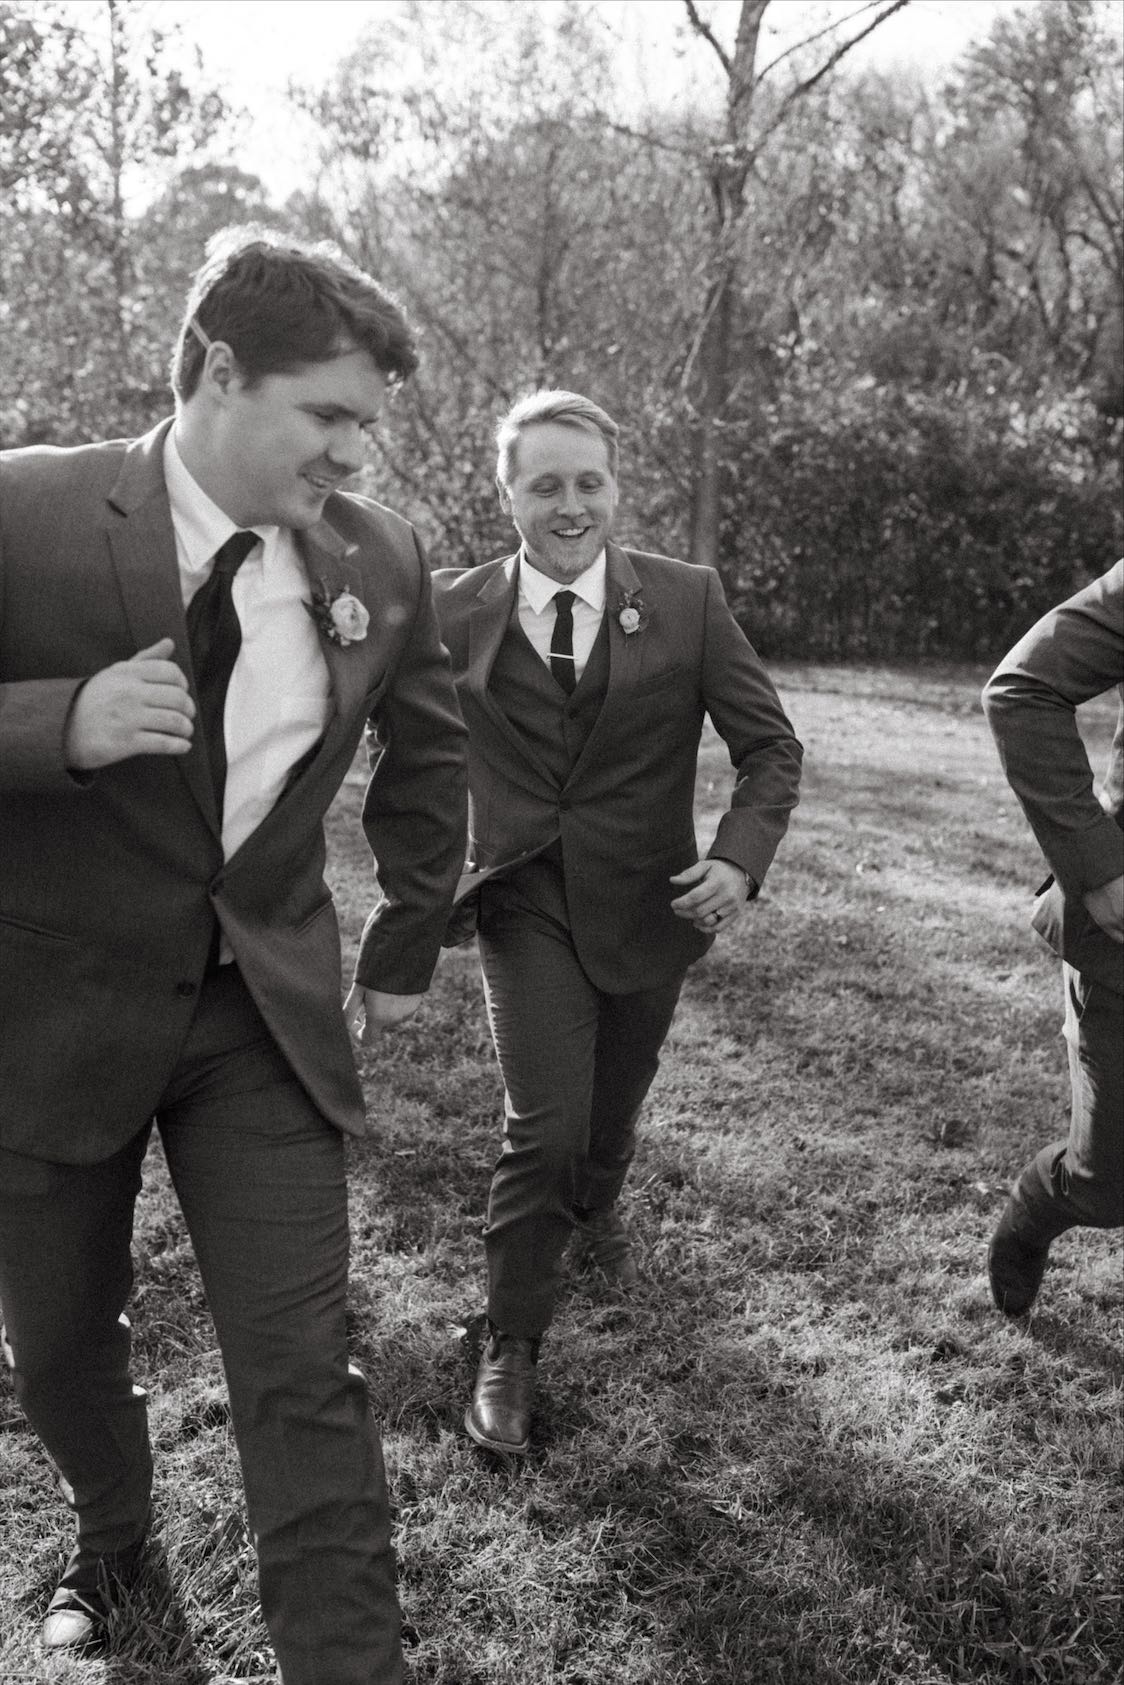 Groom and groomsmen running during bridal party photos at Double Creek Farm